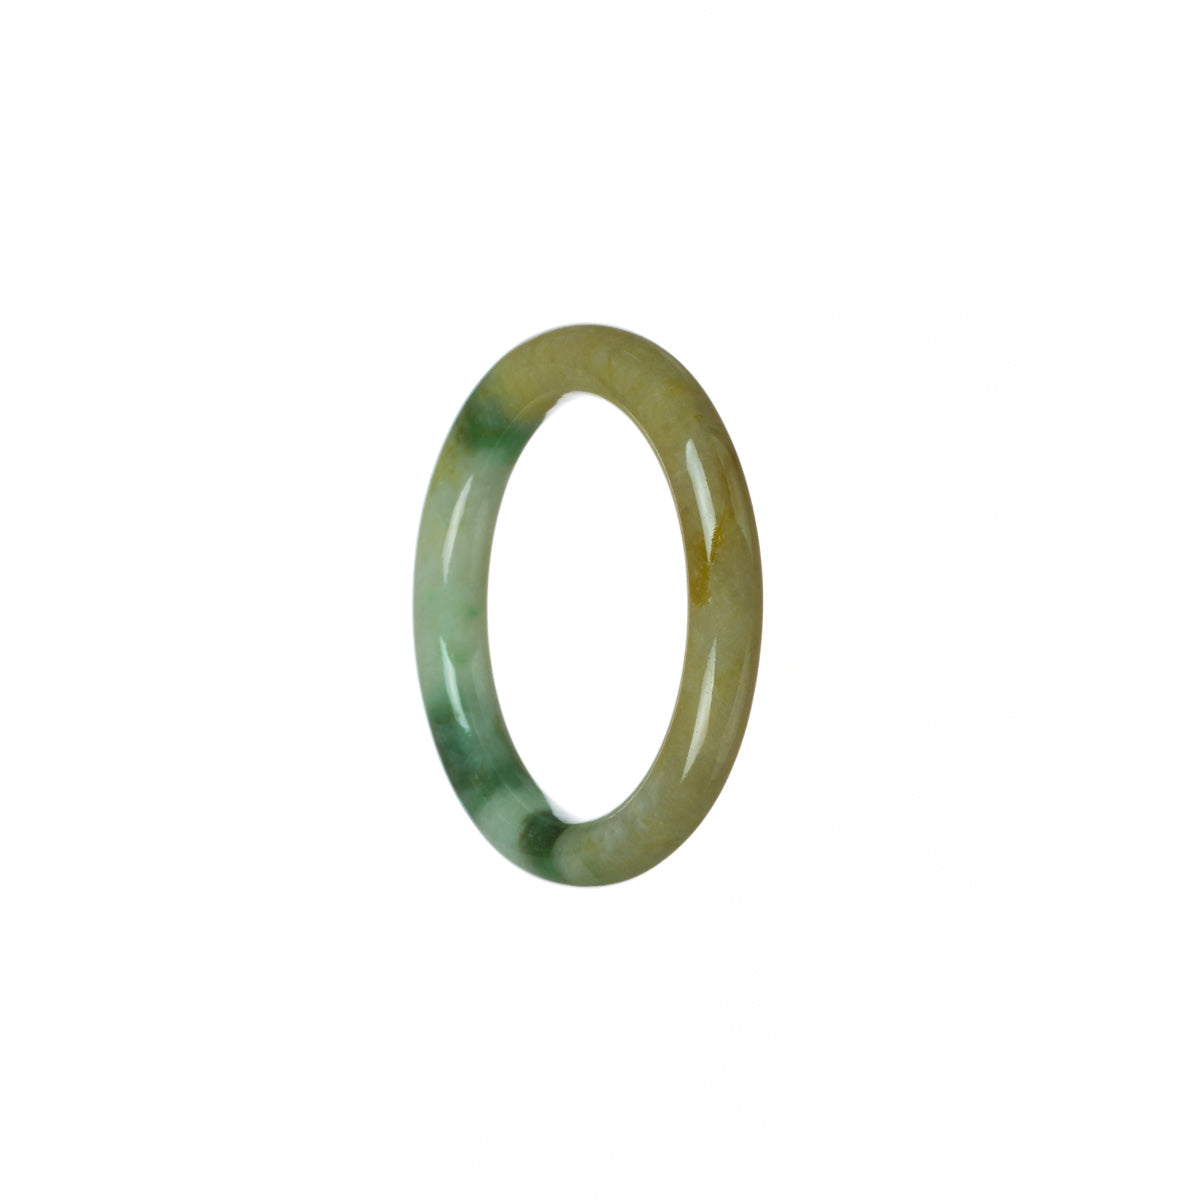 A beautiful child-sized jade bangle bracelet with genuine Grade A brownish white jadeite jade. The bracelet features a lovely emerald green color, making it a unique and stylish accessory for young ones.